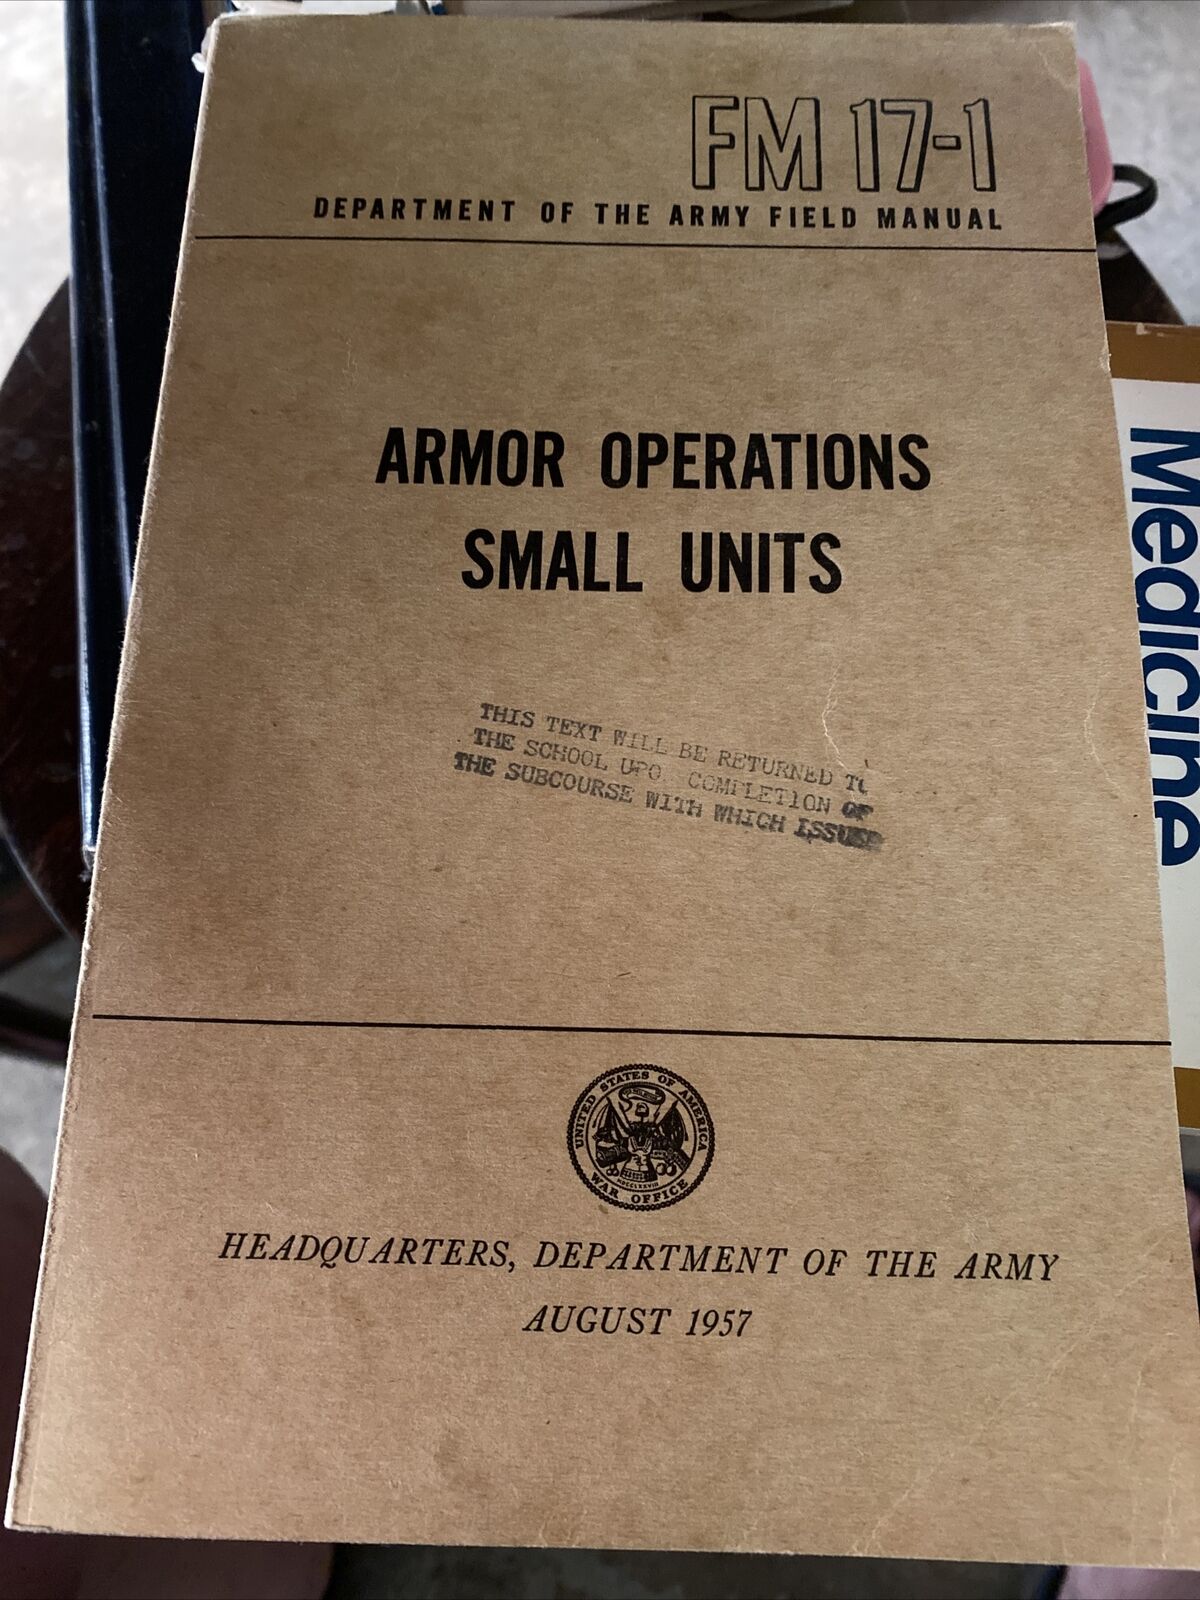 U.S. ARMY TECHNICAL BOOK ARMOR OPERATIONS  AUG 1957